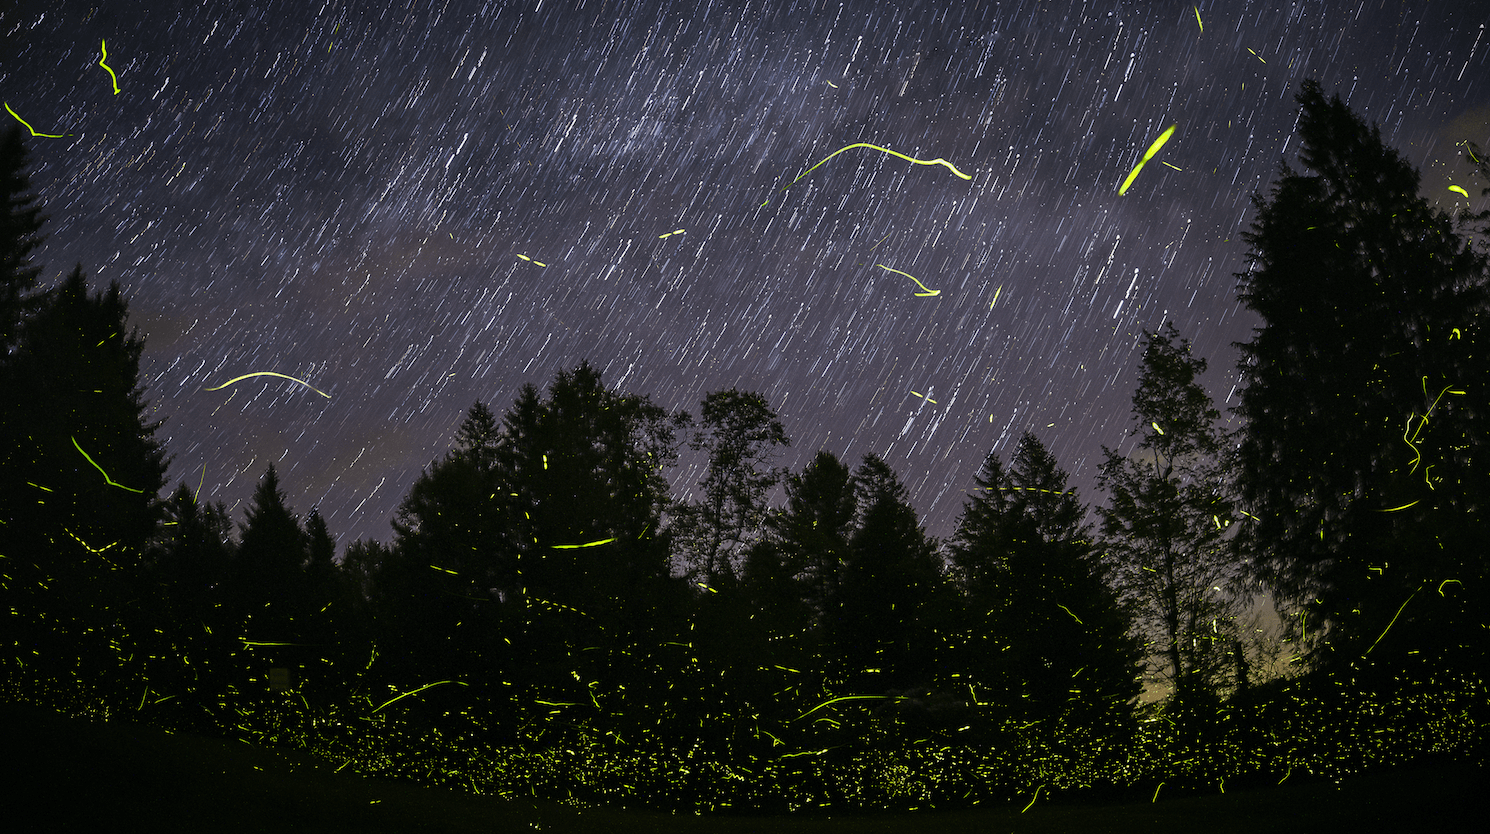 Best Place to See Synchronous Fireflies - View 1